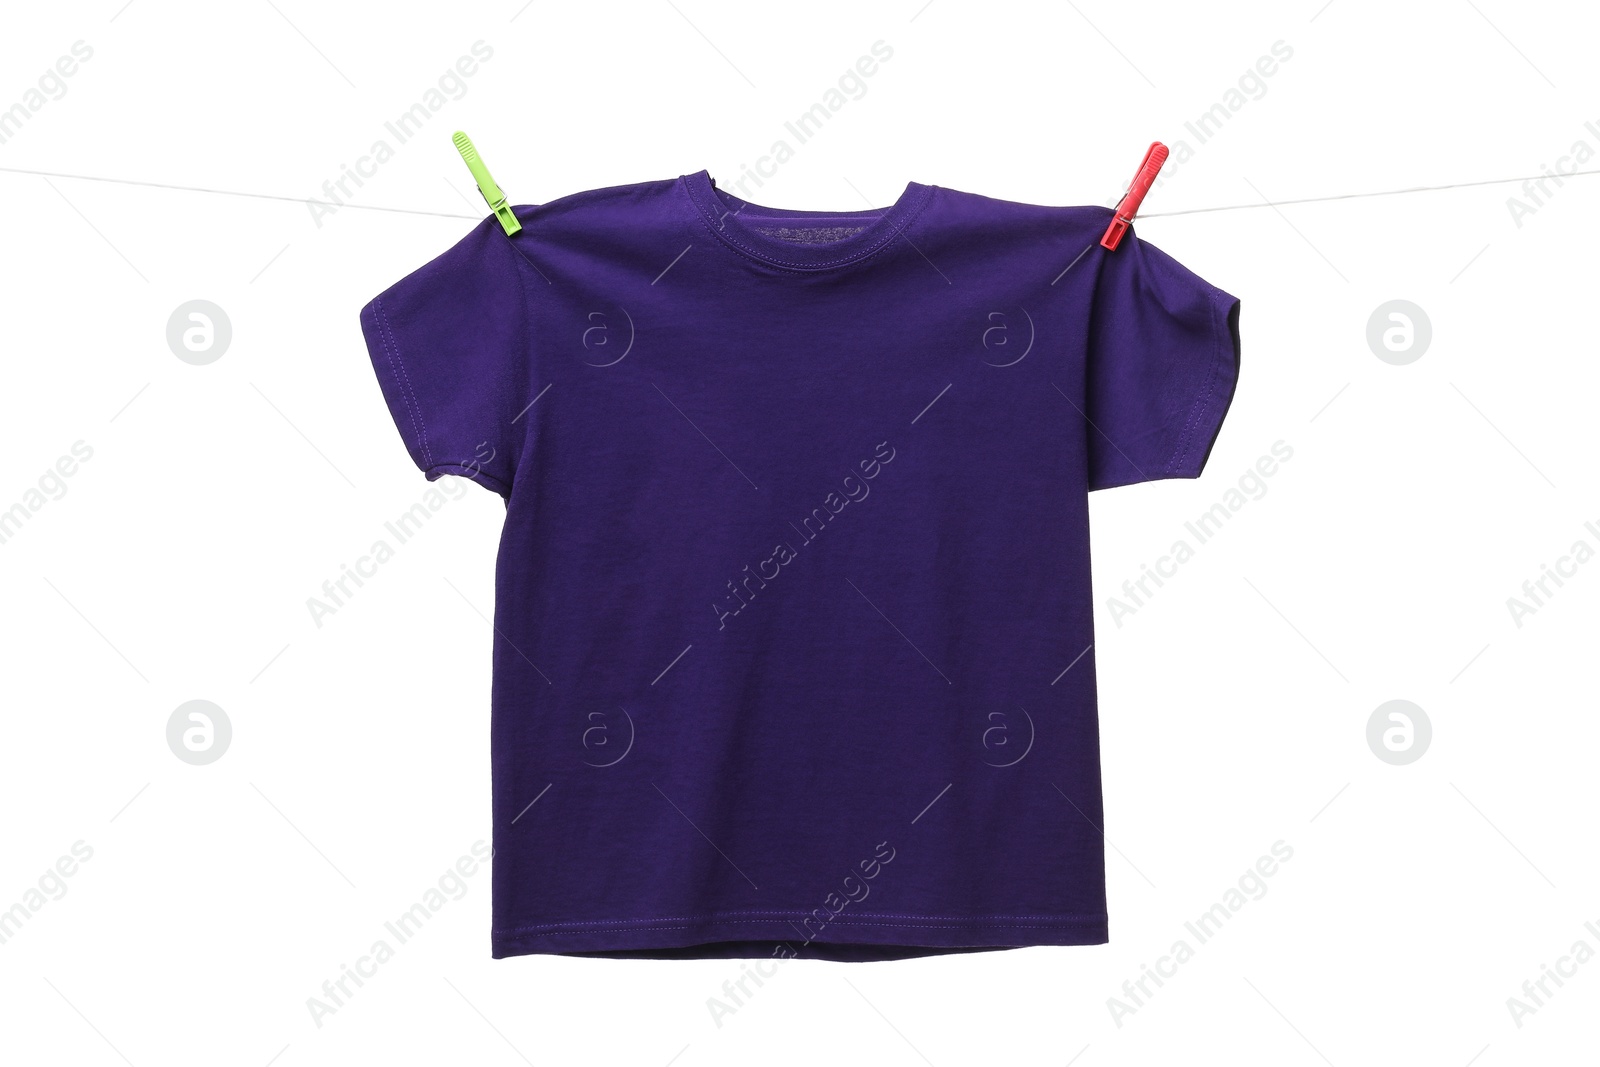 Photo of One purple t-shirt drying on washing line isolated on white